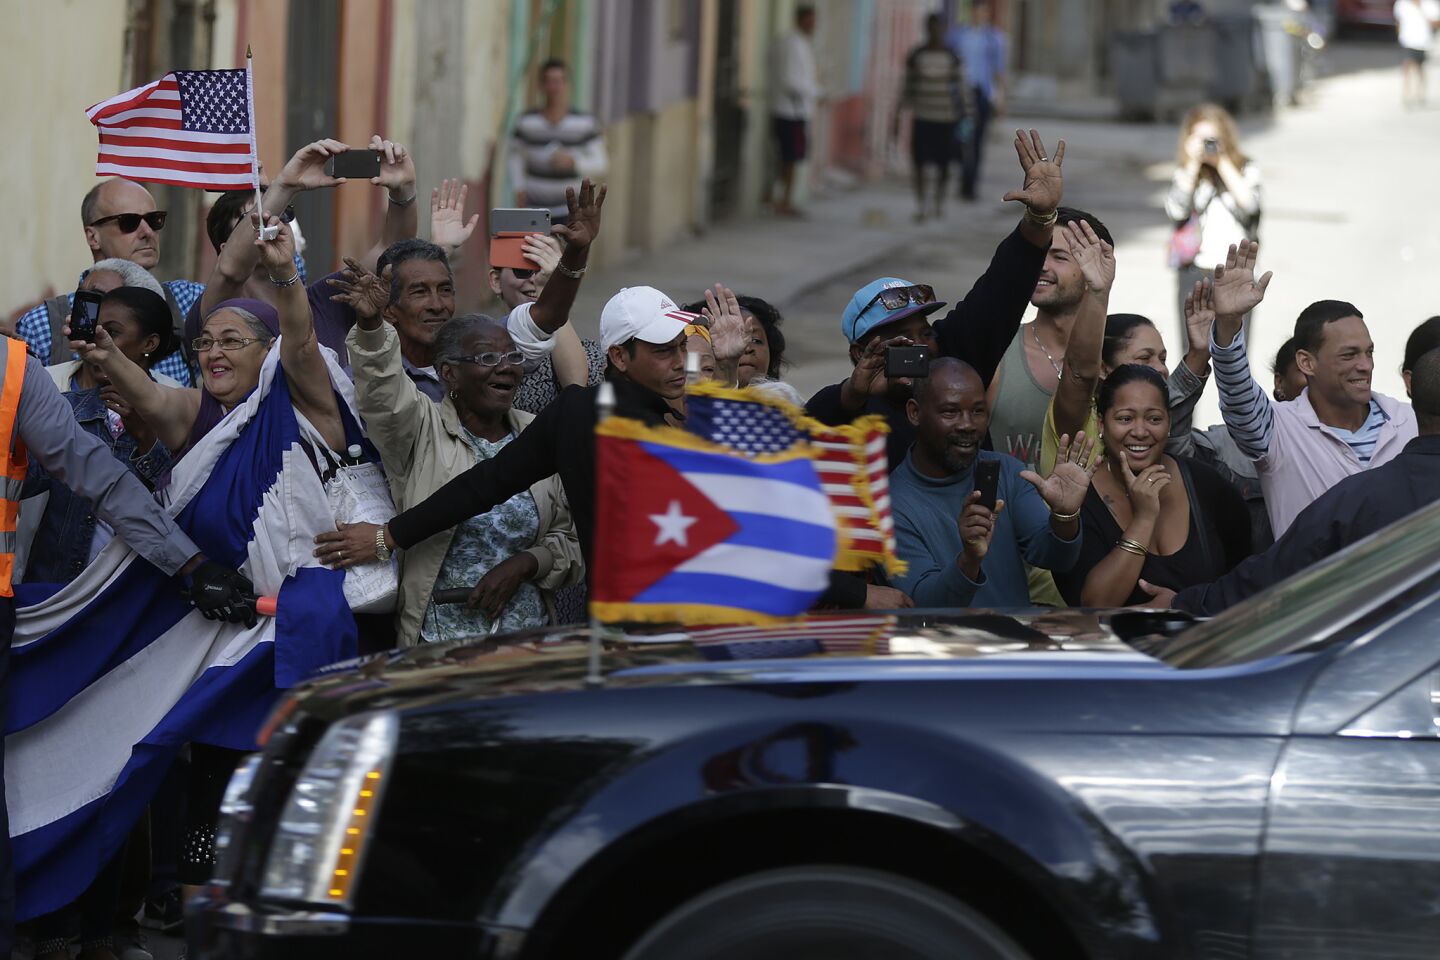 Cubans wave to President Obama as he passes through central Havana.